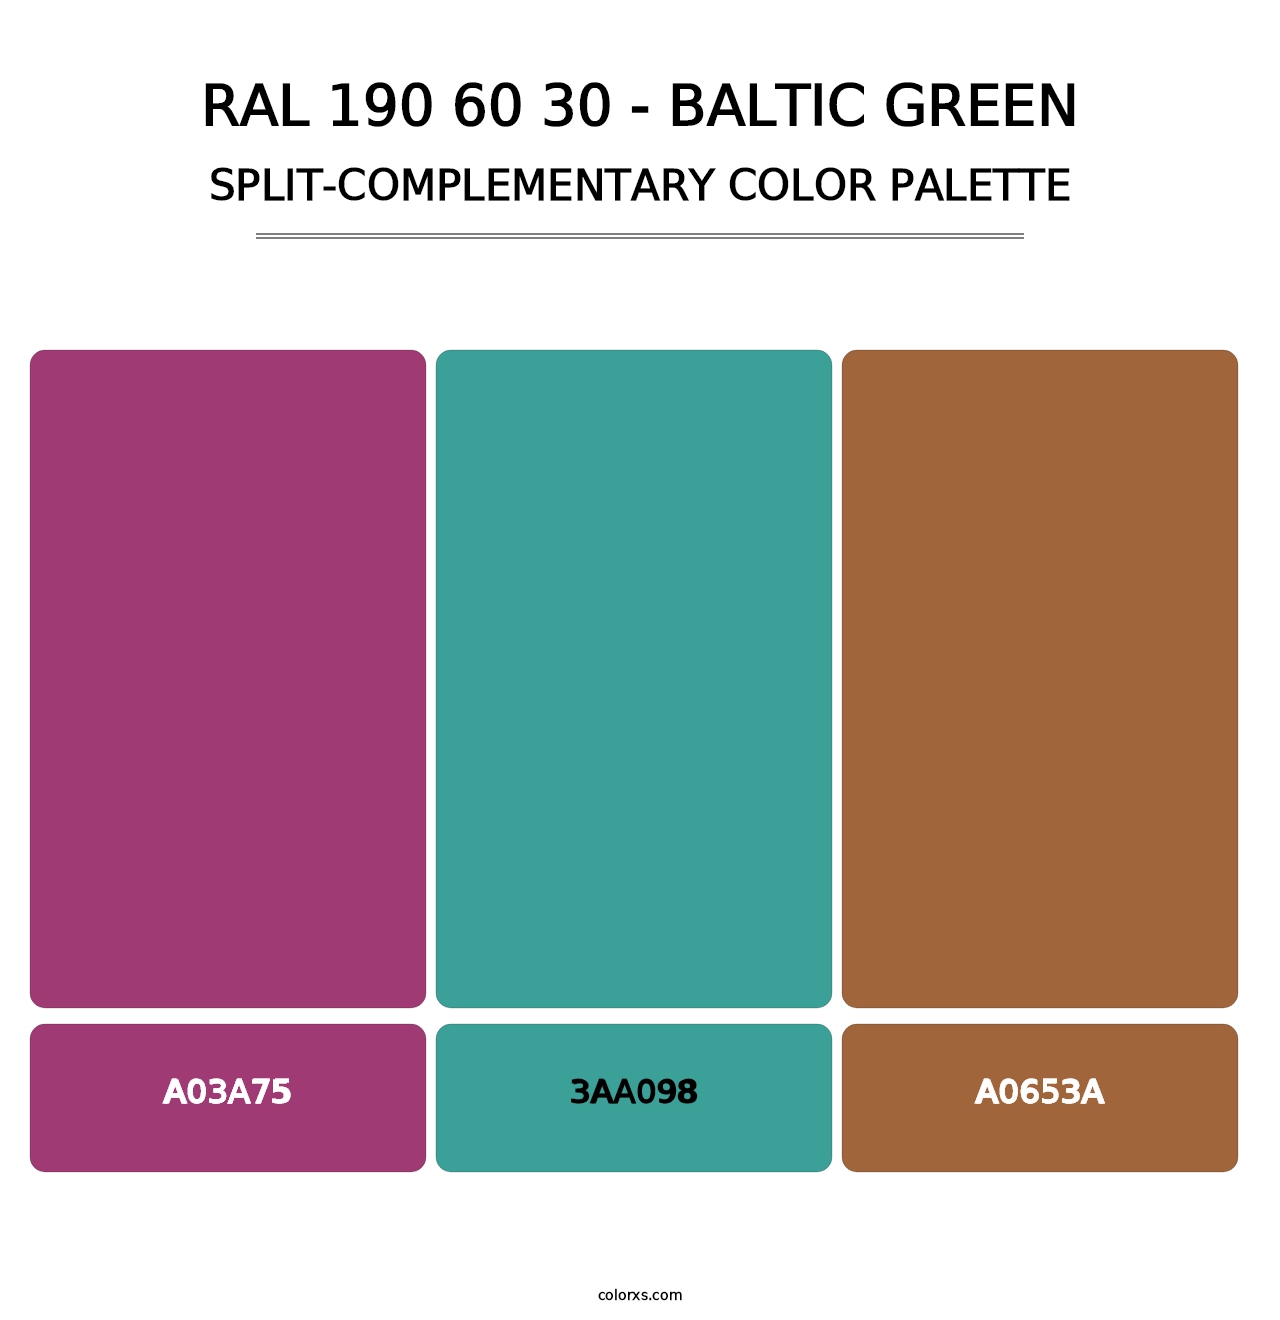 RAL 190 60 30 - Baltic Green - Split-Complementary Color Palette